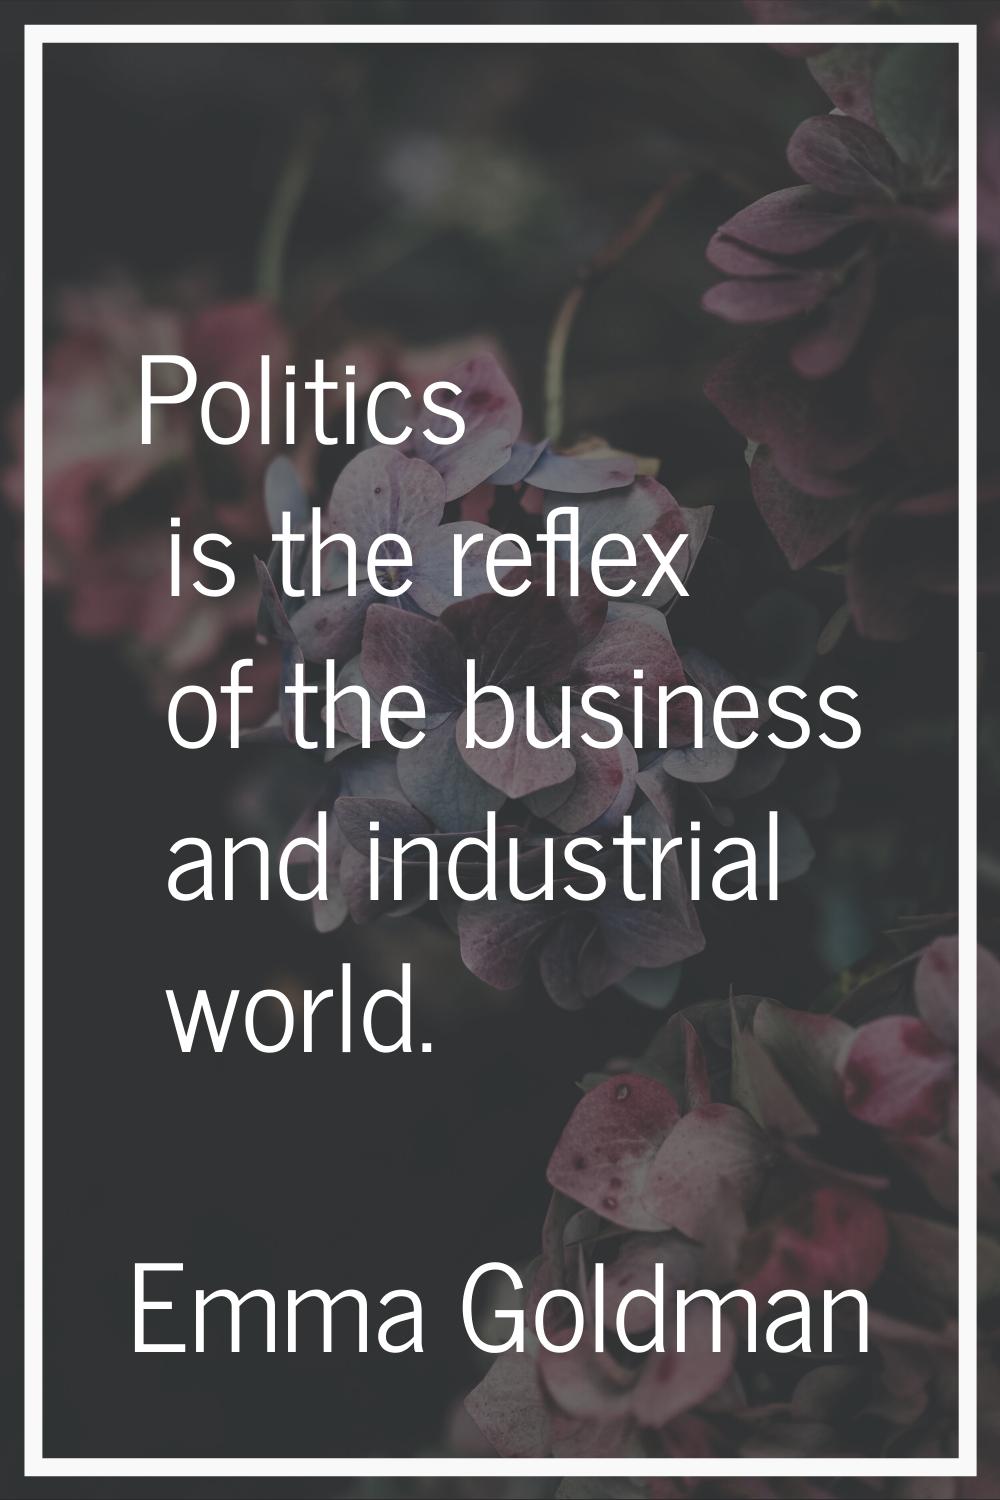 Politics is the reflex of the business and industrial world.